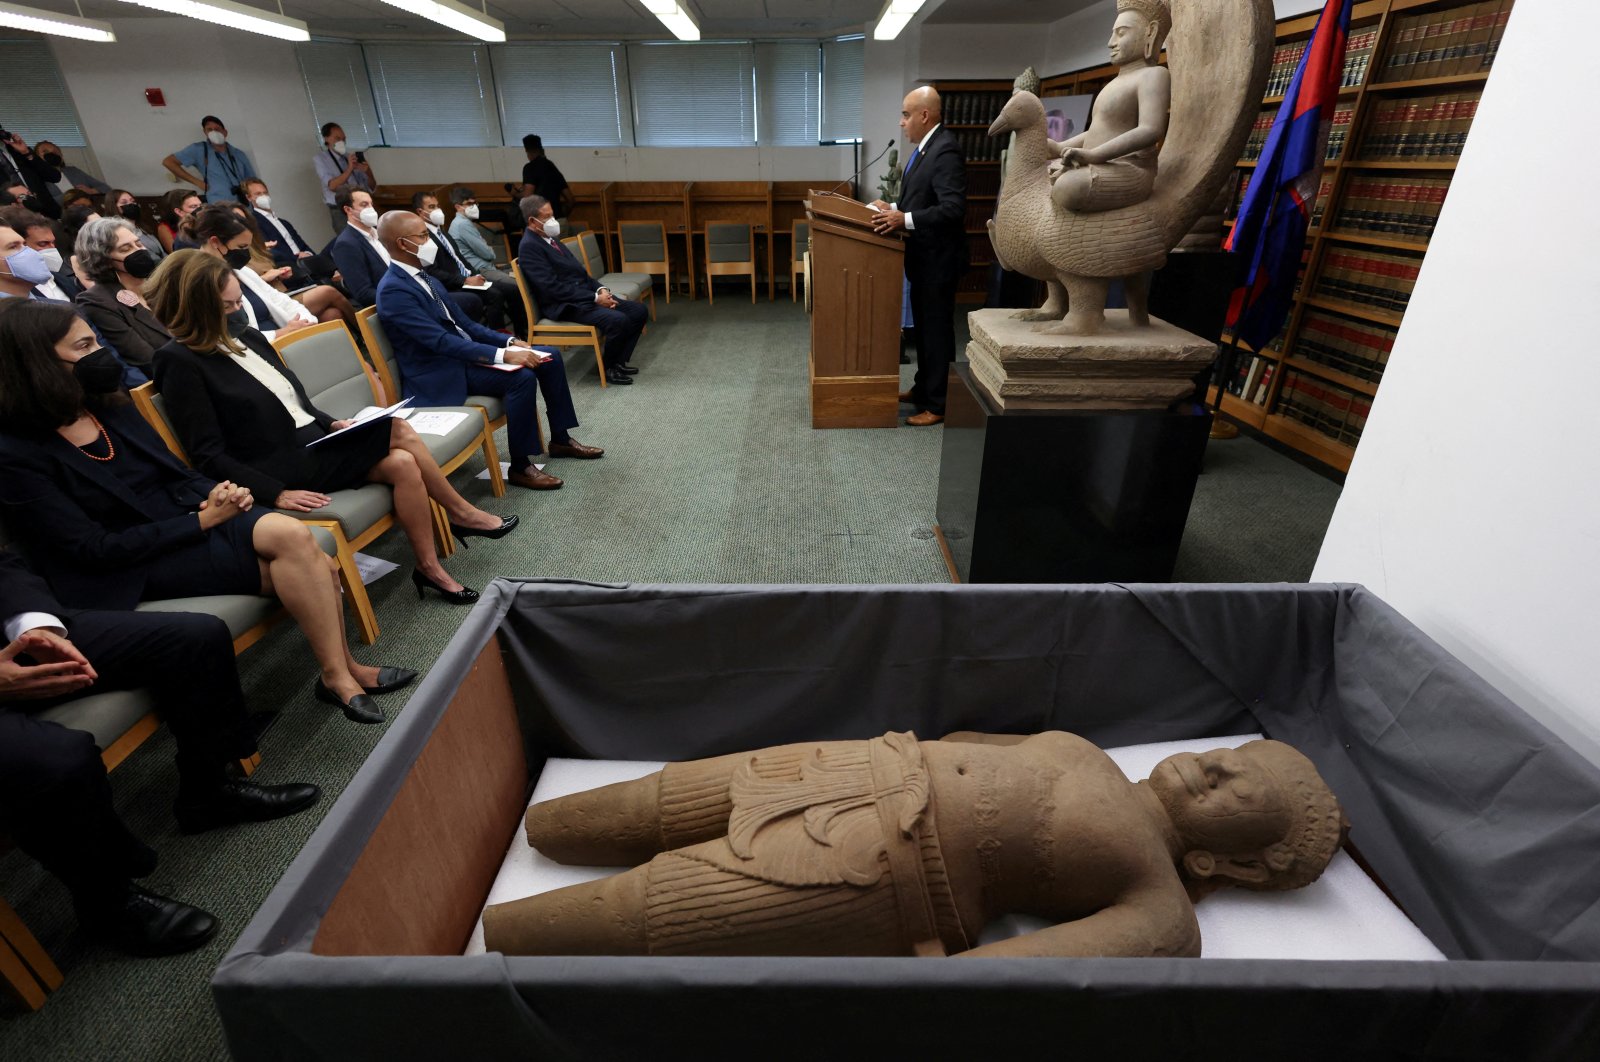 FILE PHOTO: Ricky Patel, the Acting Special Agent-in-Charge of the New York Field Office of the Department of Homeland Security, delivers remarks during an announcement of the repatriation and return to Cambodia of 30 Cambodian antiquities sold to U.S. Attorney’s Office in Manhattan, New York City, U.S., Aug. 8, 2022. (Reuters Photo)